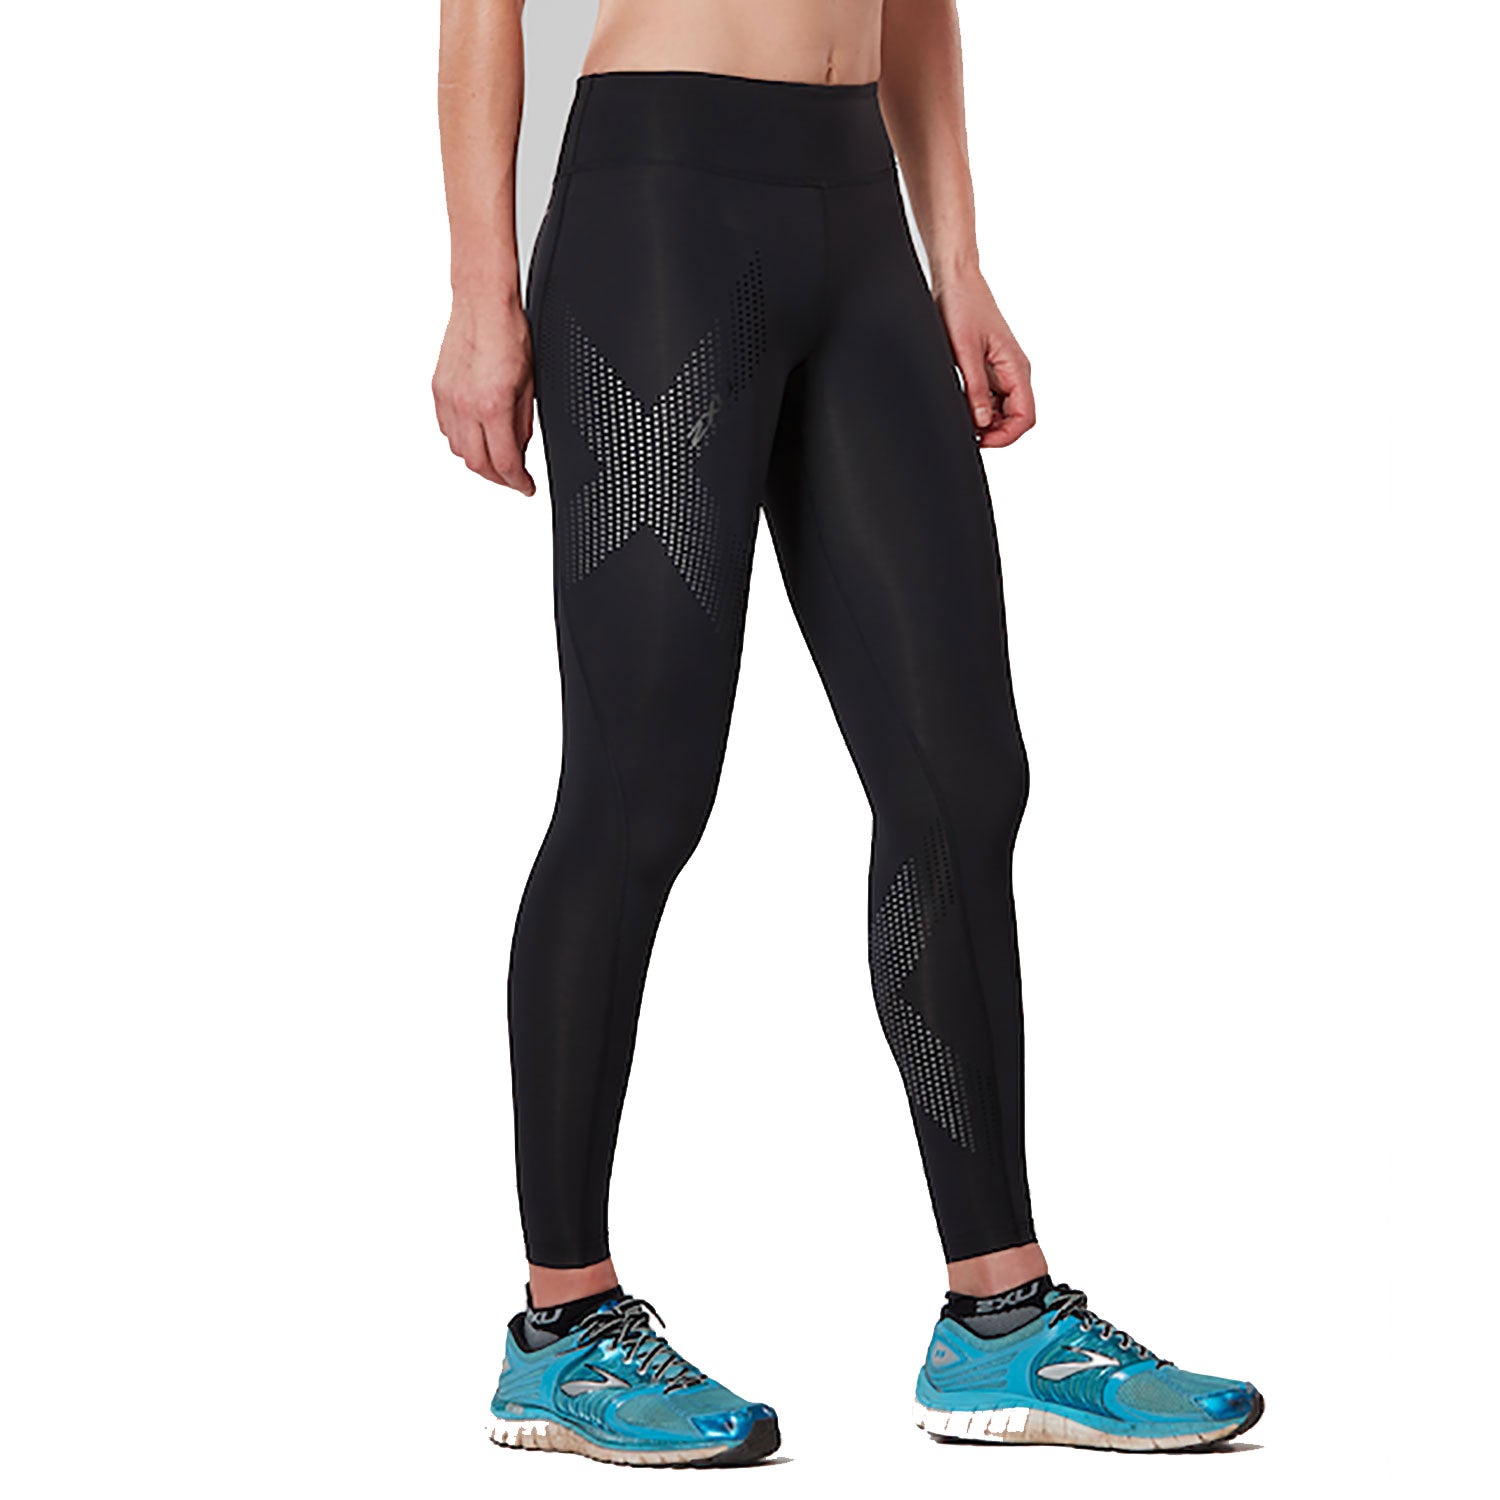 2XU Black/Dotted Black Mid-Rise Compression Tights Women's Size ST